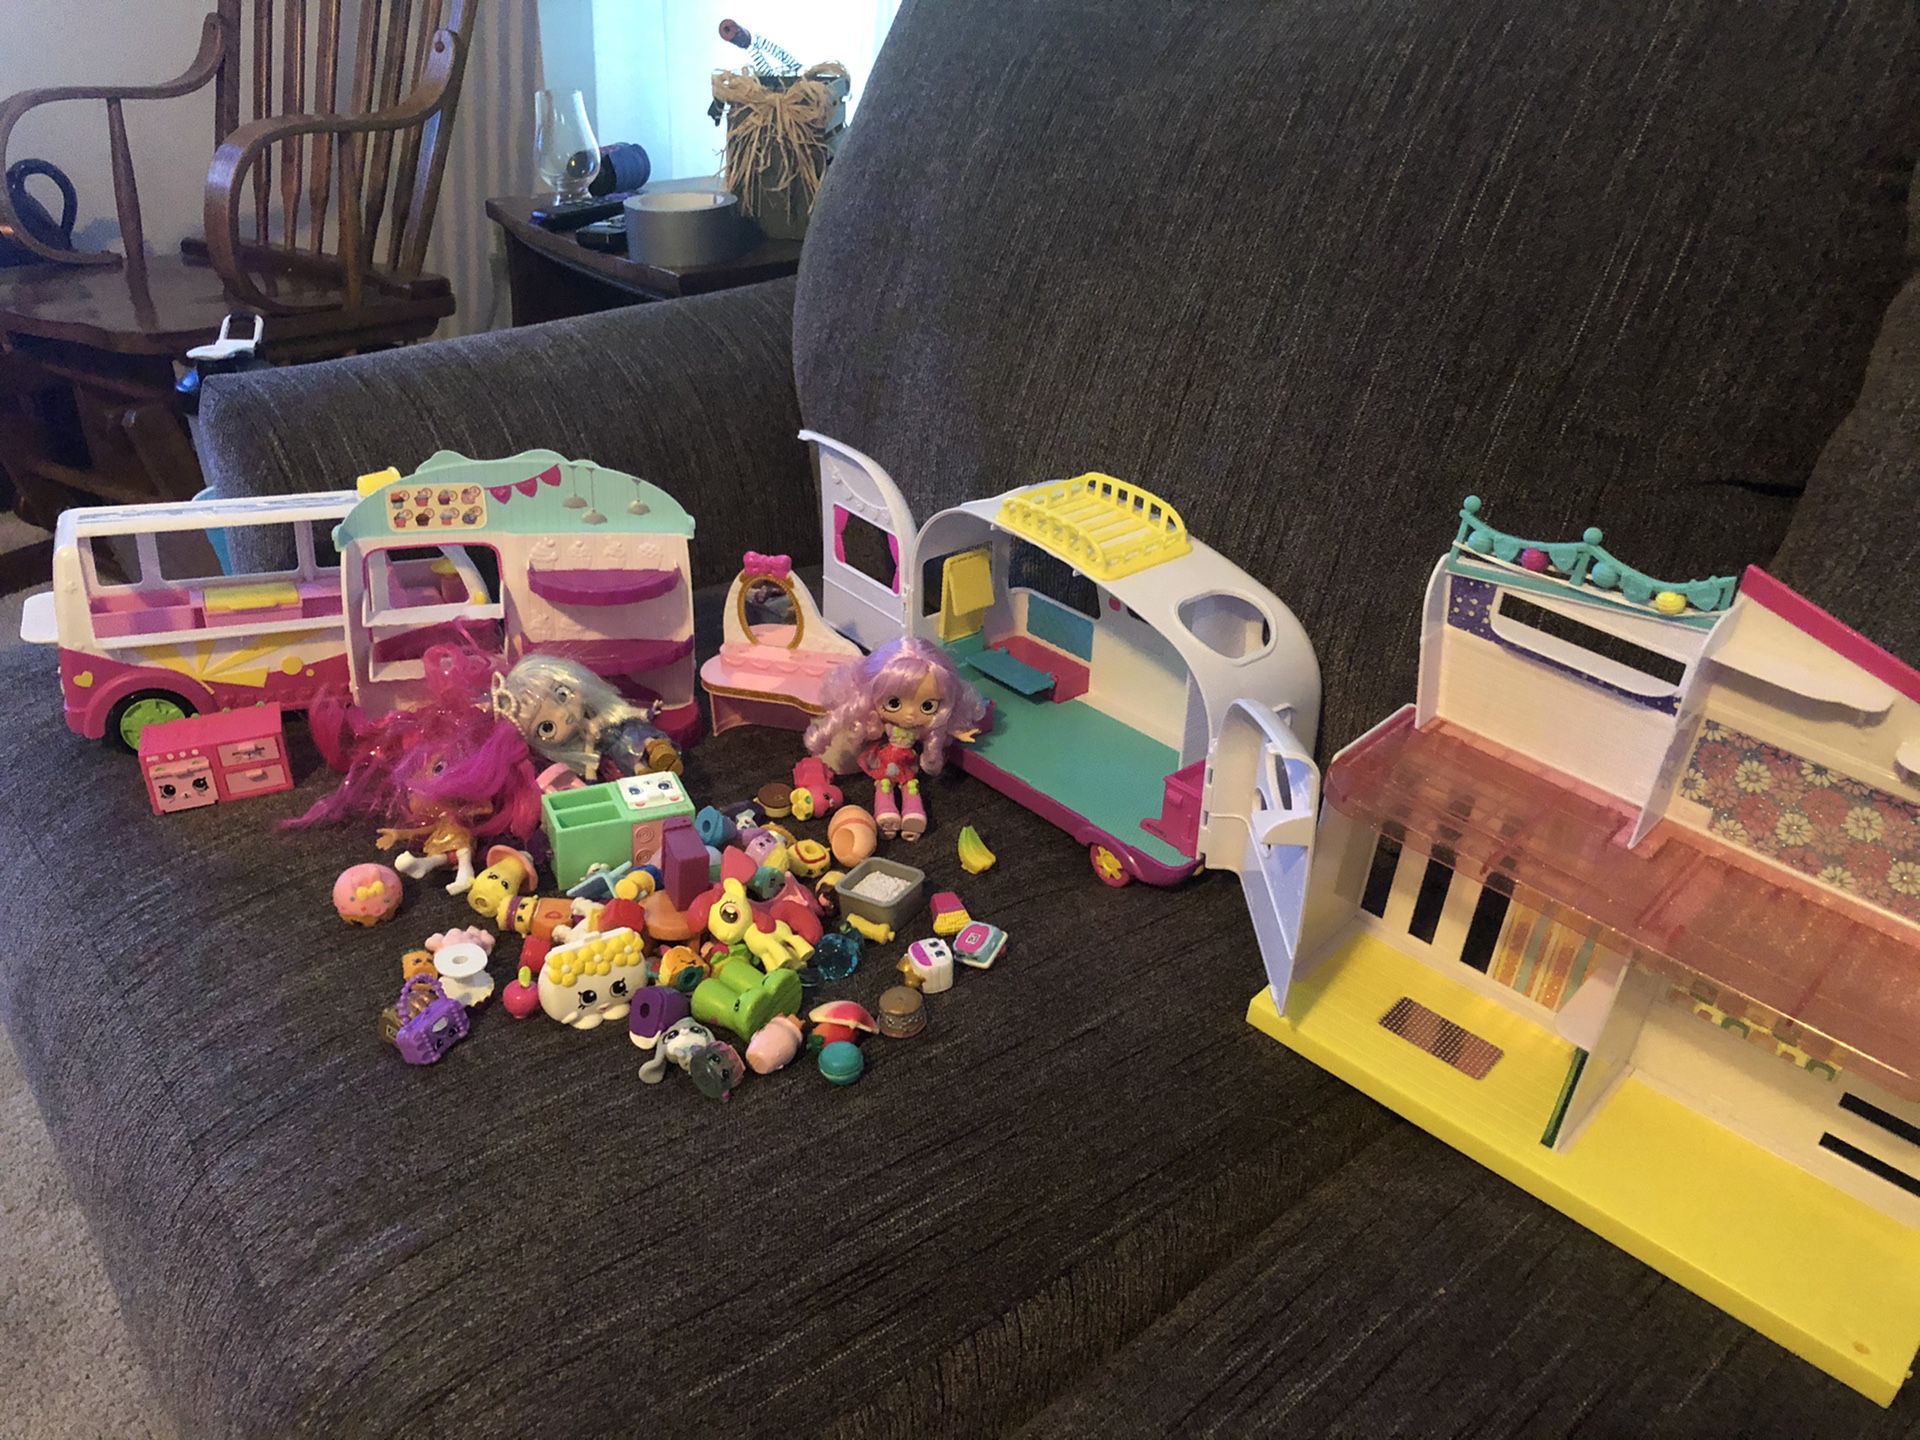 Whole bunch of shopkins